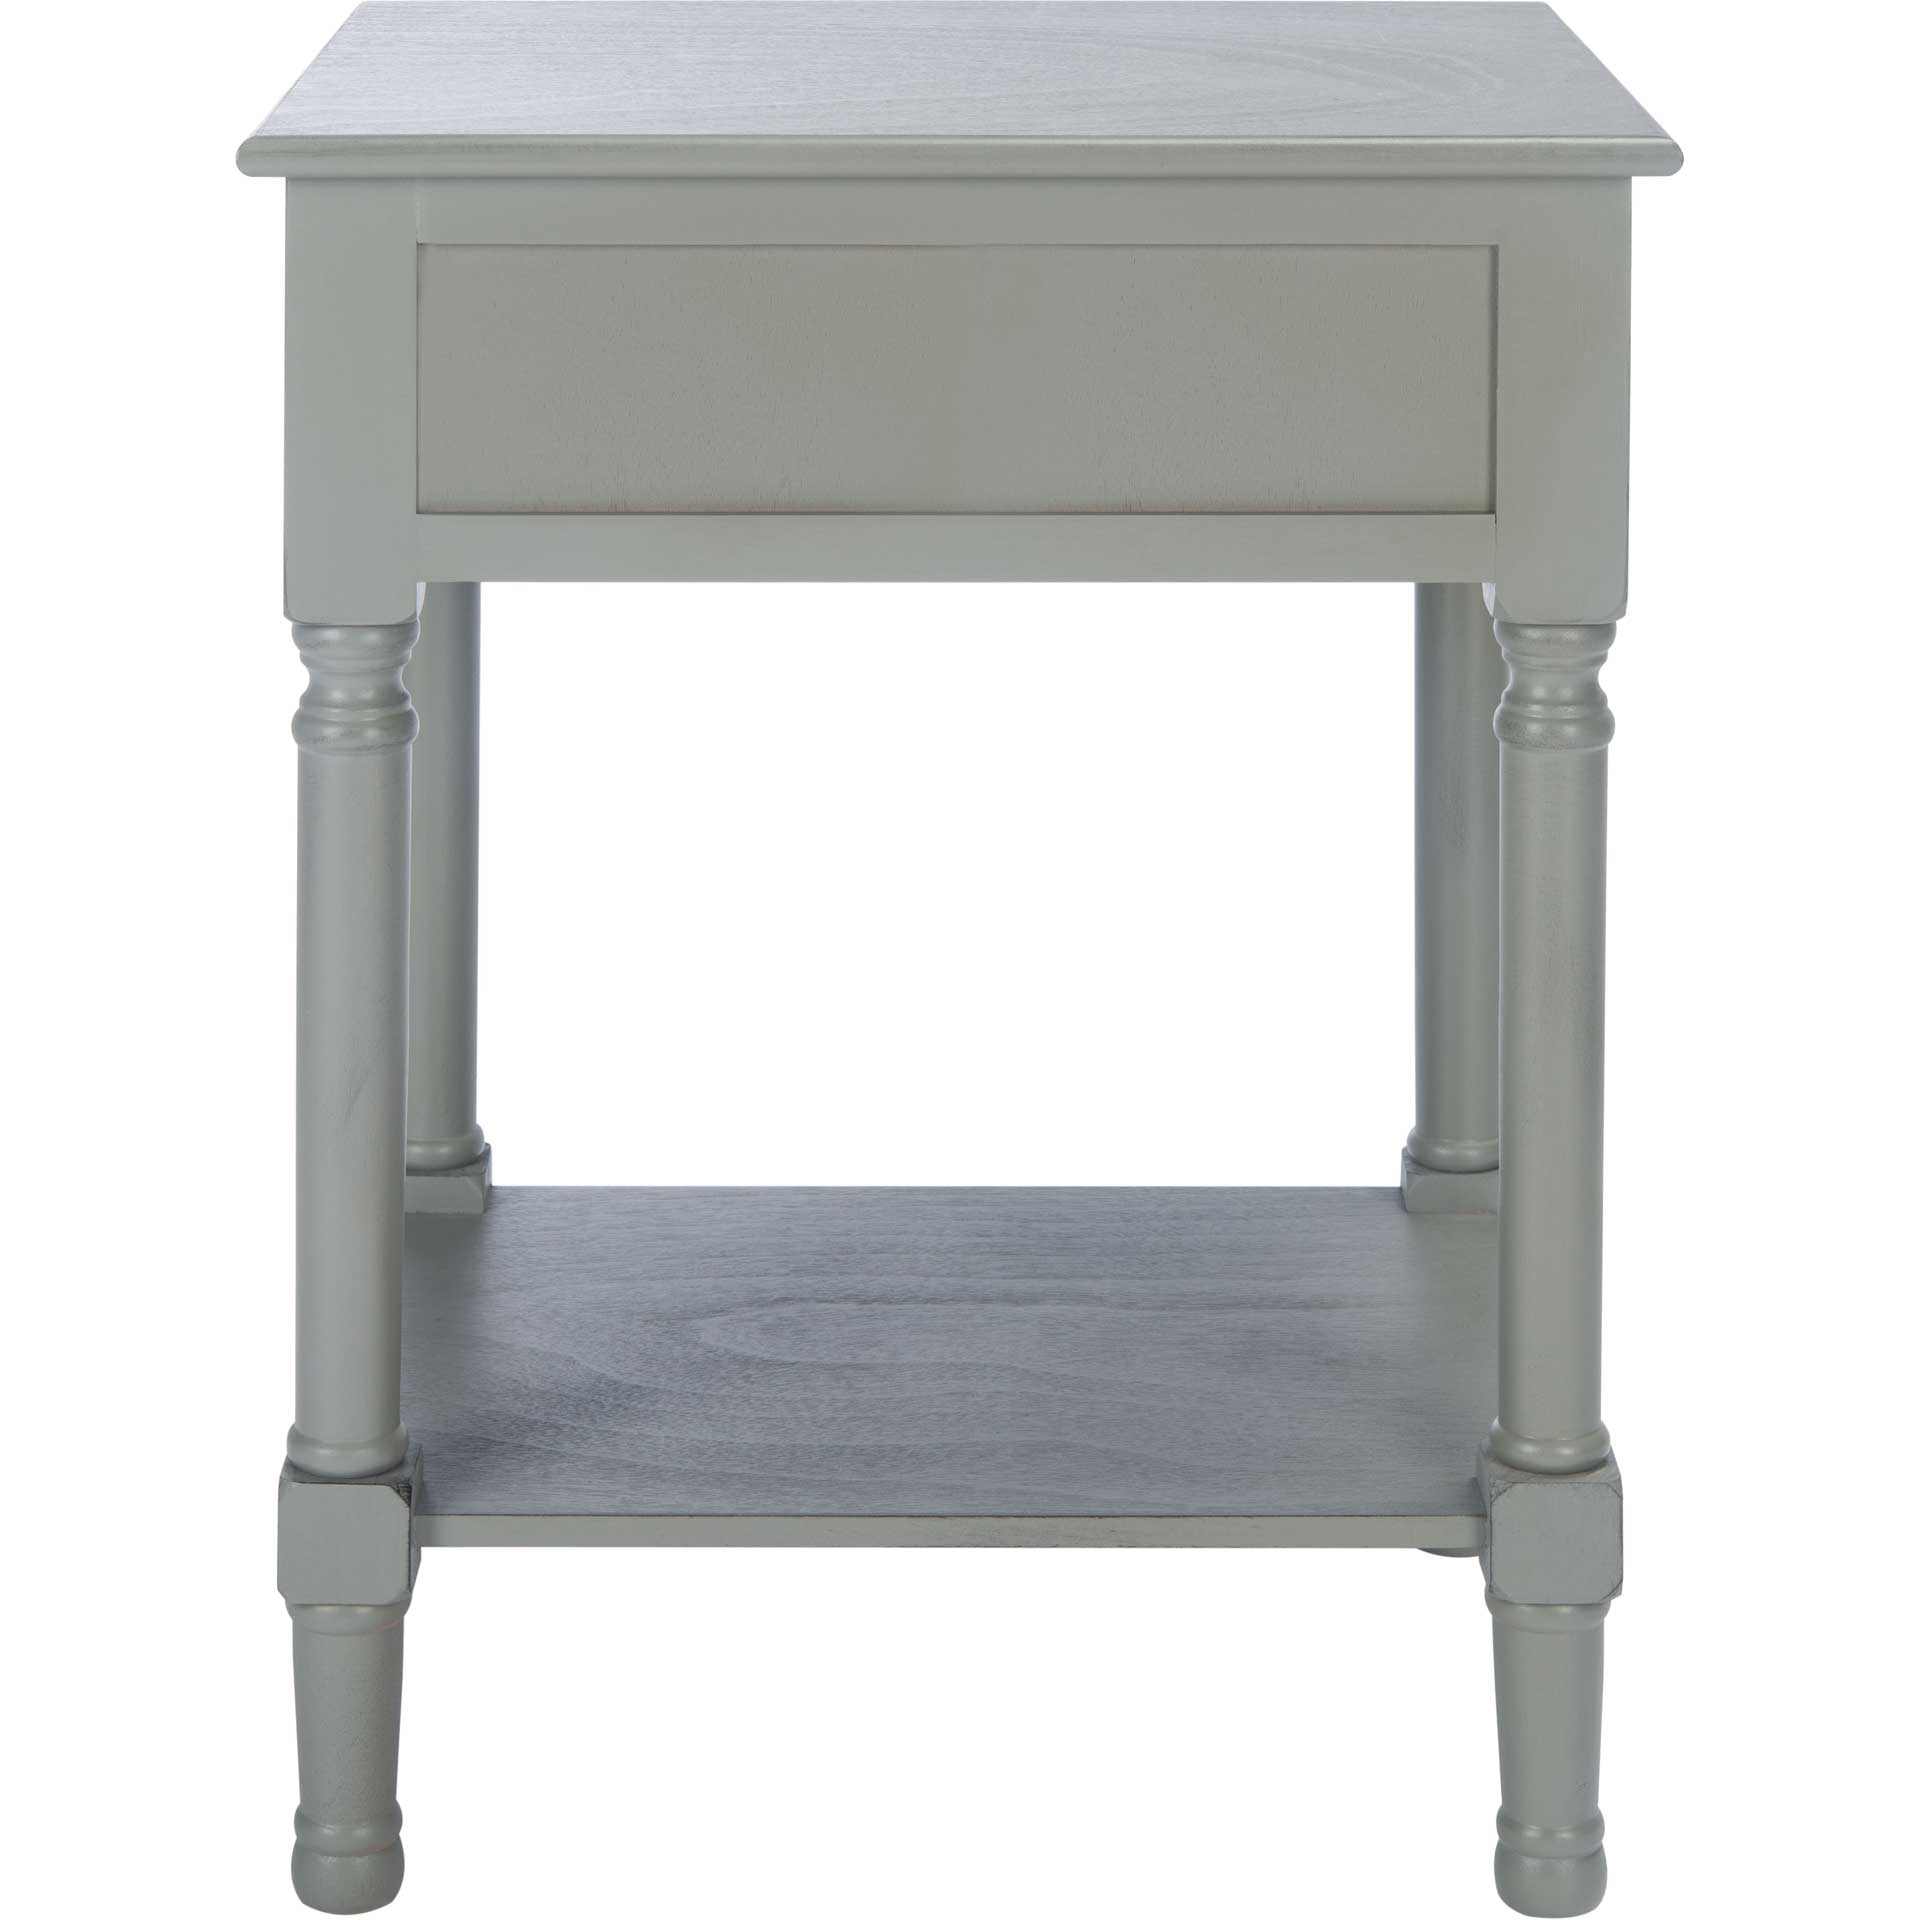 Hale 1 Drawer Accent Table Distressed Gray